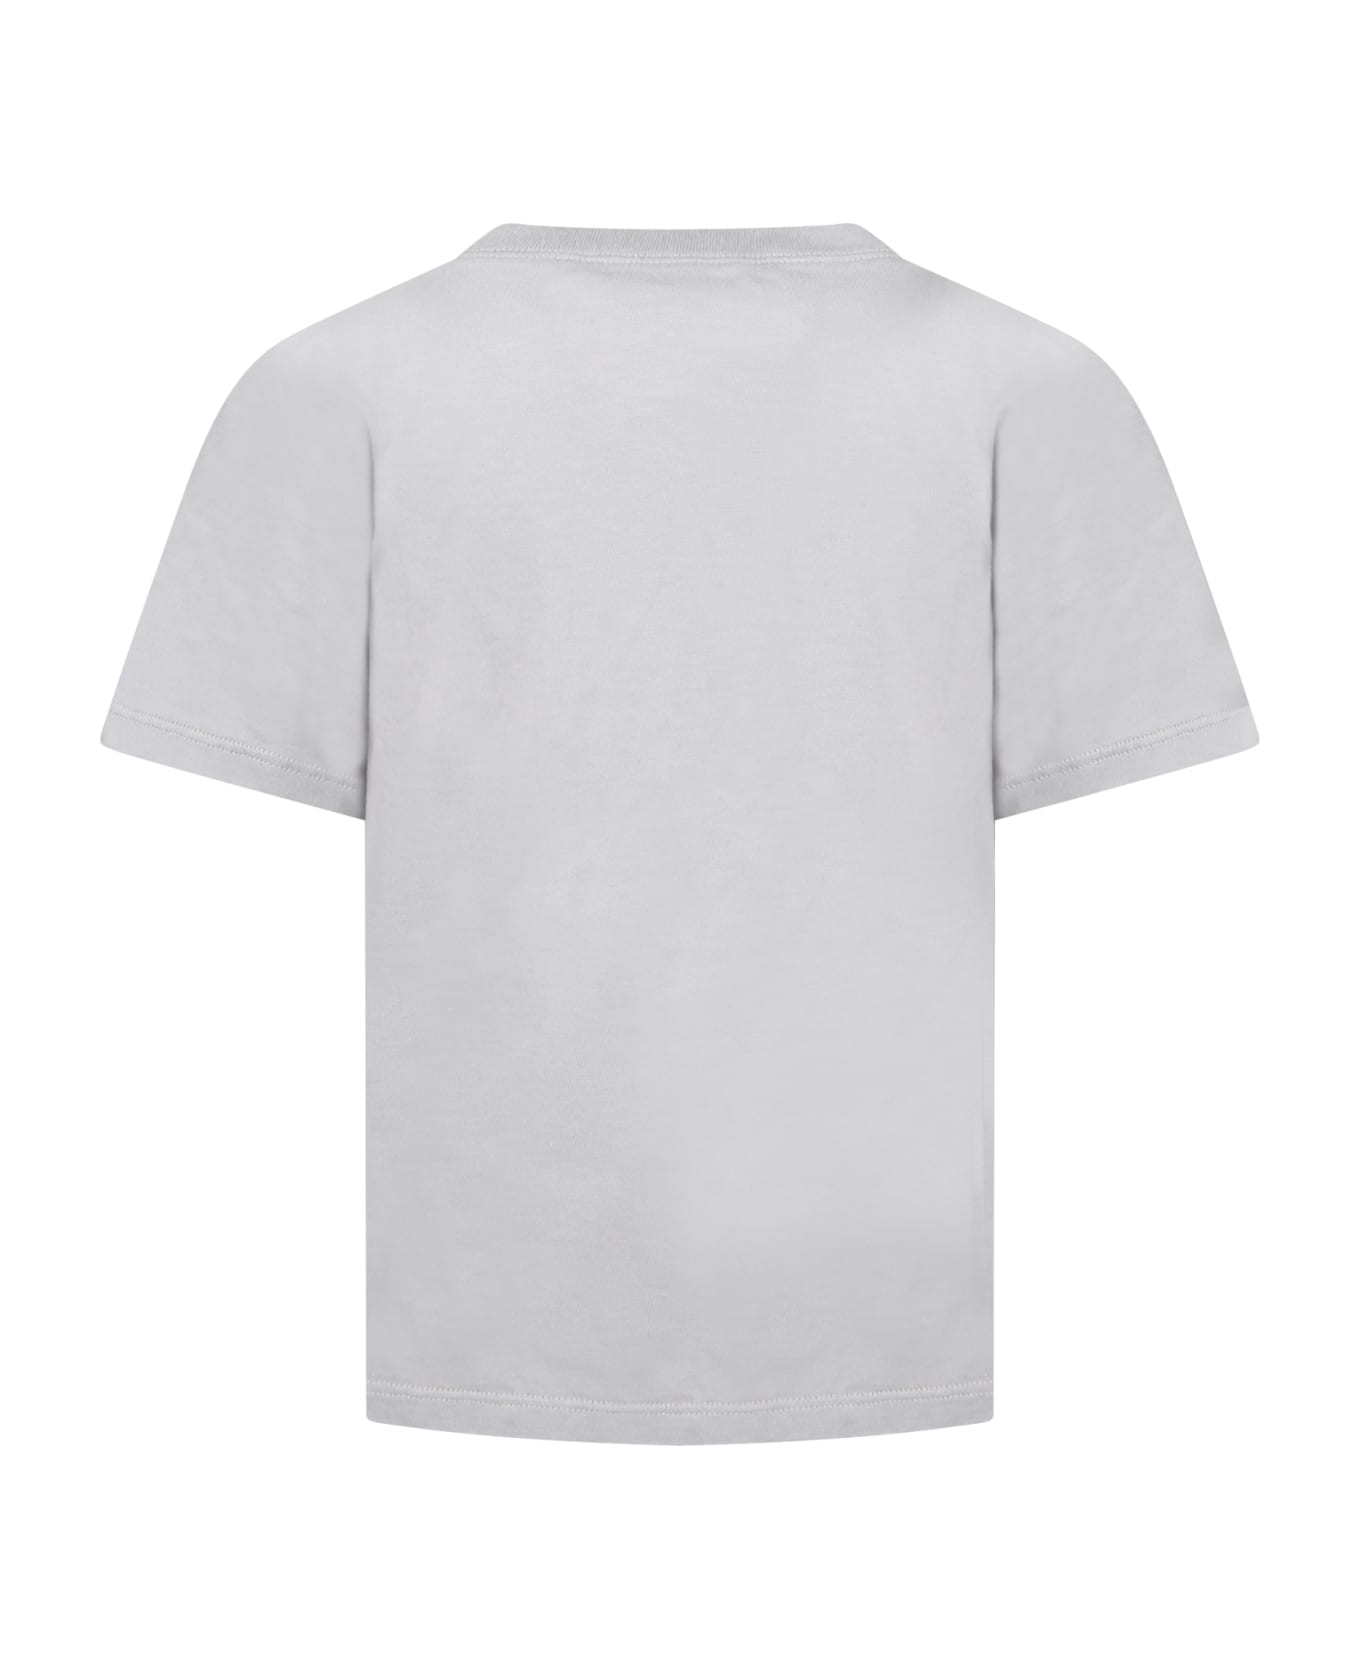 Gucci Grey T-shirt For Kids With Logo - Thunder Storm